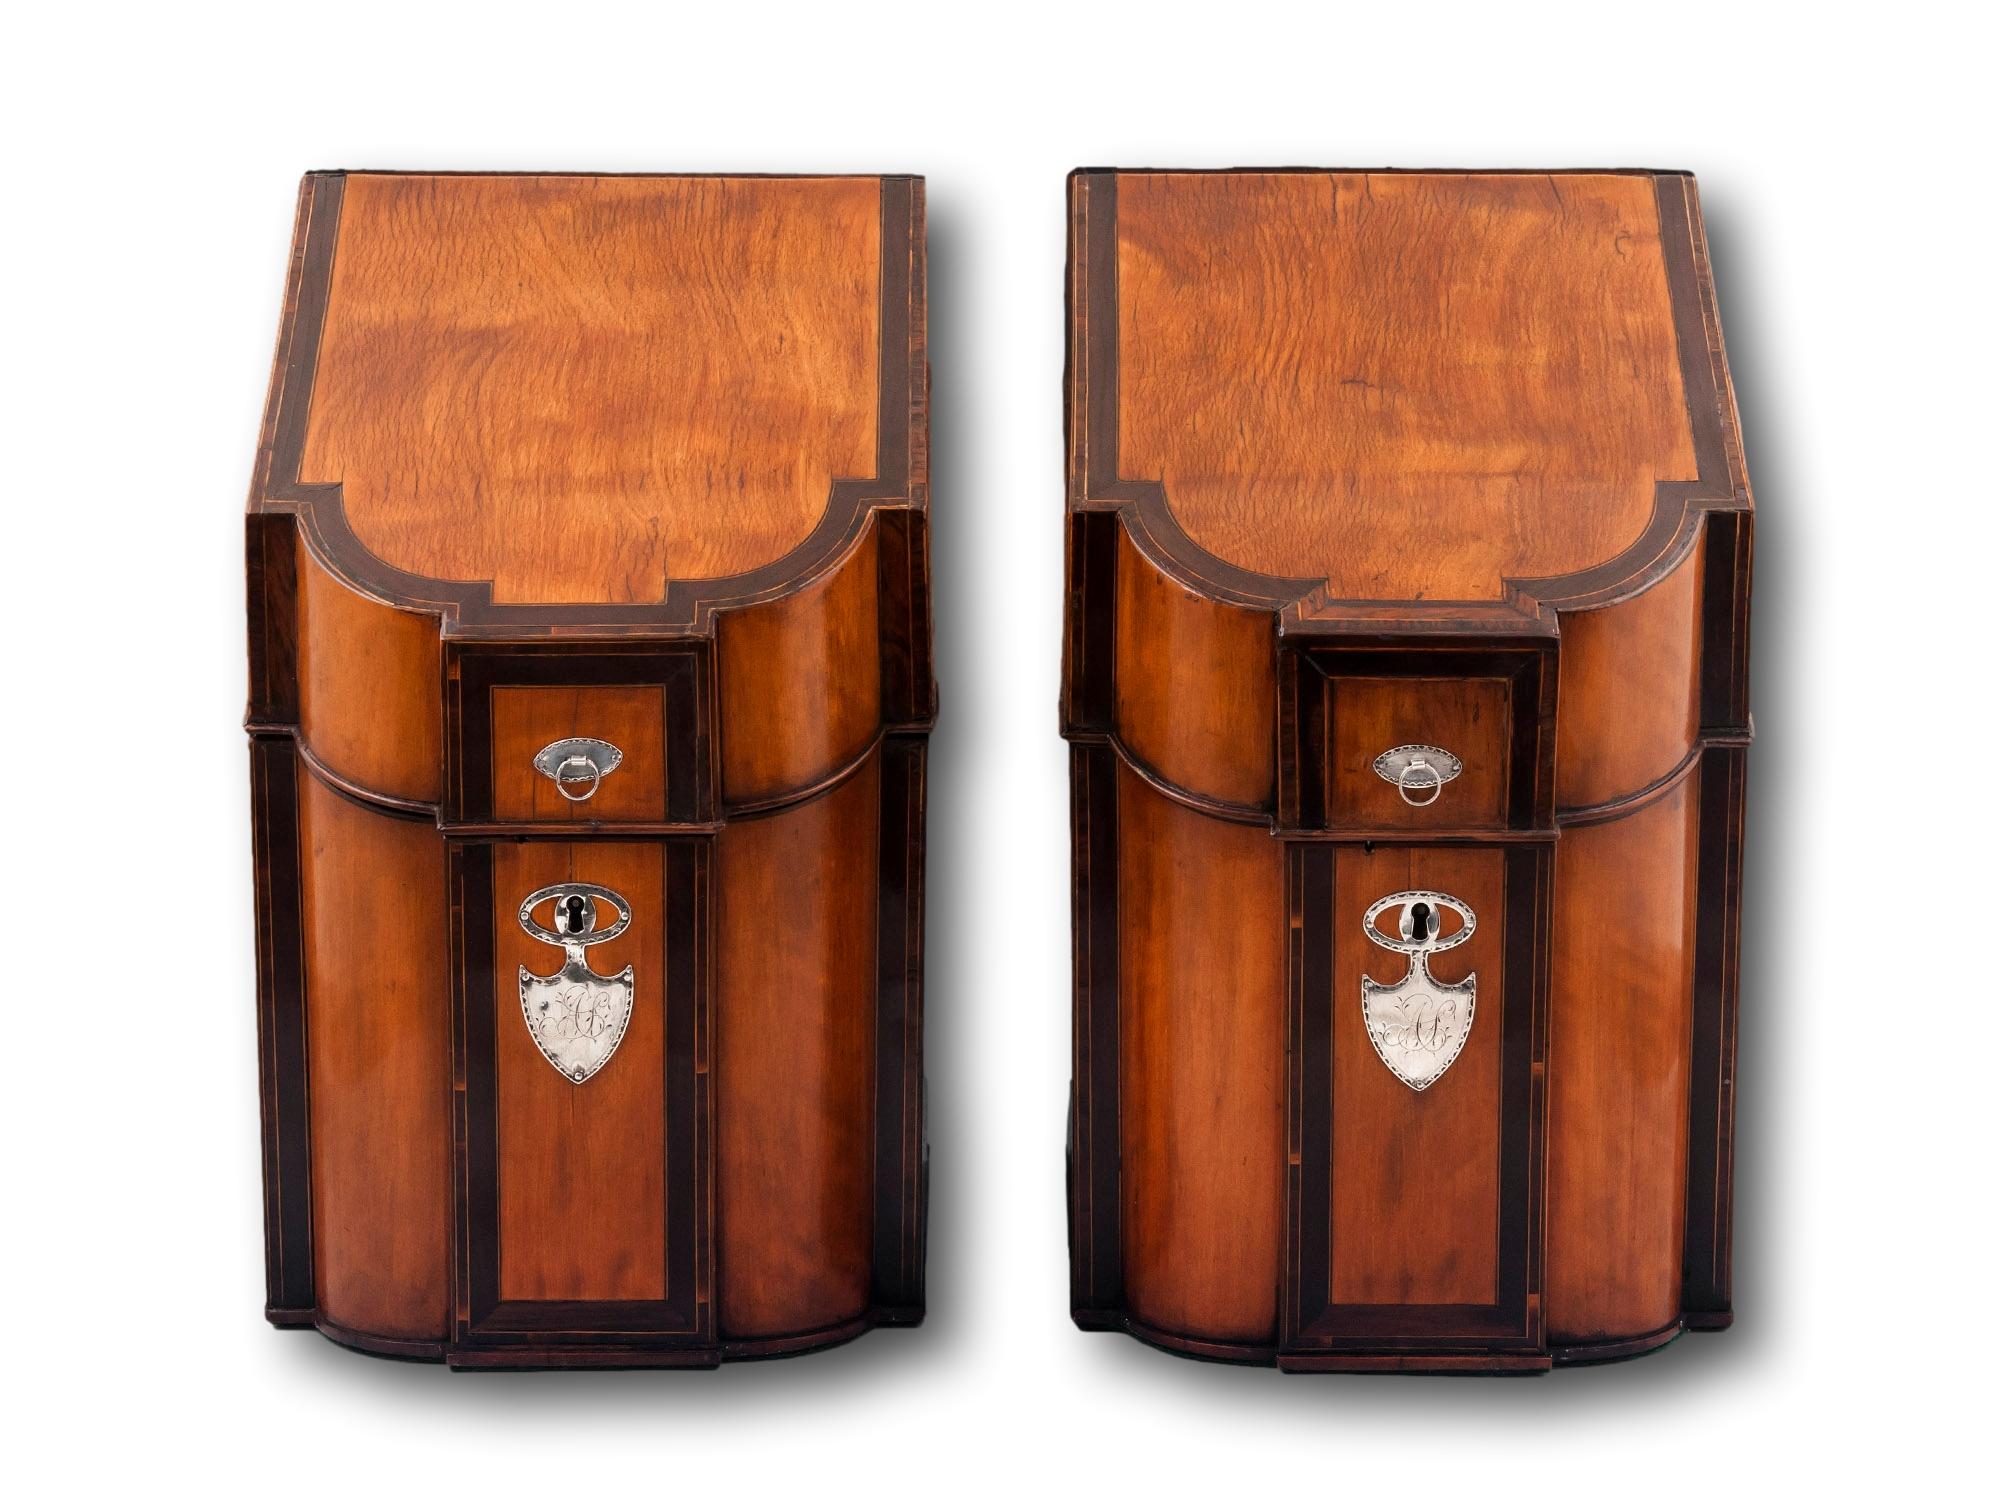 Presented with Silver Shield Escutcheons

From our Knife Boxes collection, we are delighted to offer this pair of Georgian Satinwood Knife Boxes. The Knife Boxes with sloping tops and breakfront D-shaped sections veneered in Satinwood with Laburnum